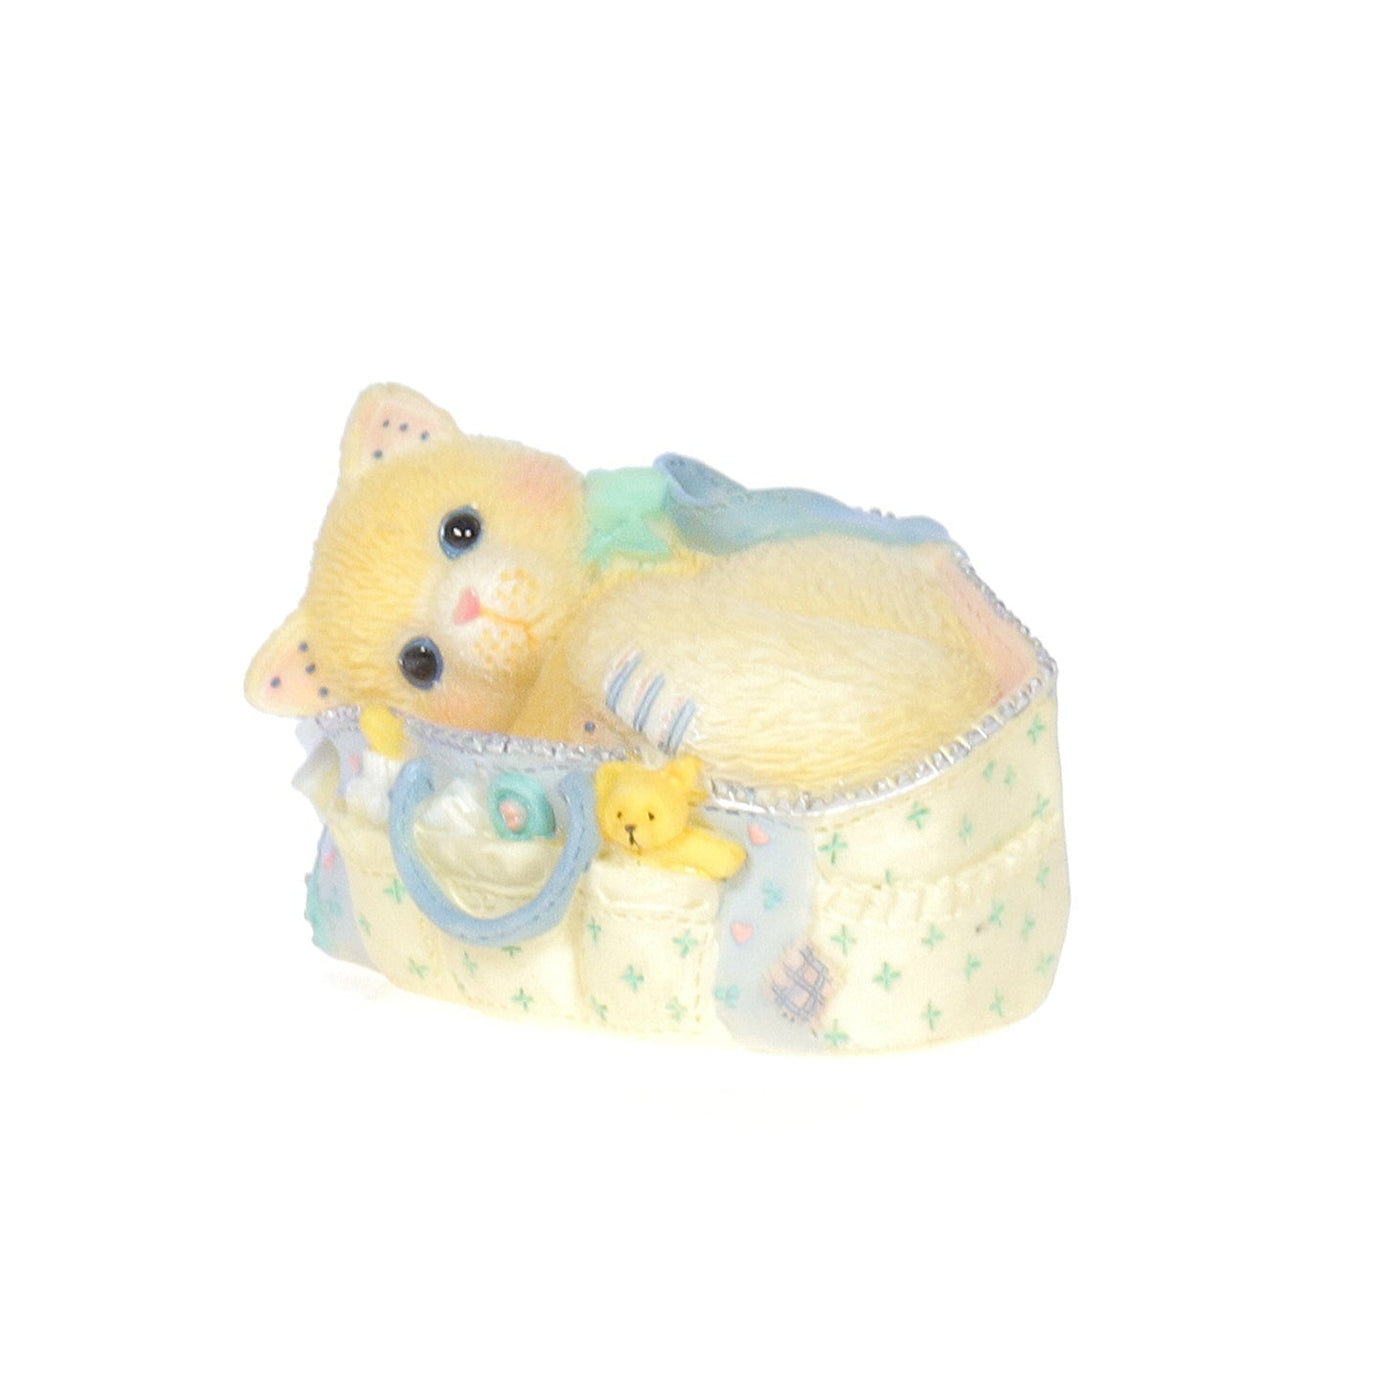 Calico_Kittens_Welcoming_A_Whole_New_Bag_Of_Tricks_Family_Figurine_2001